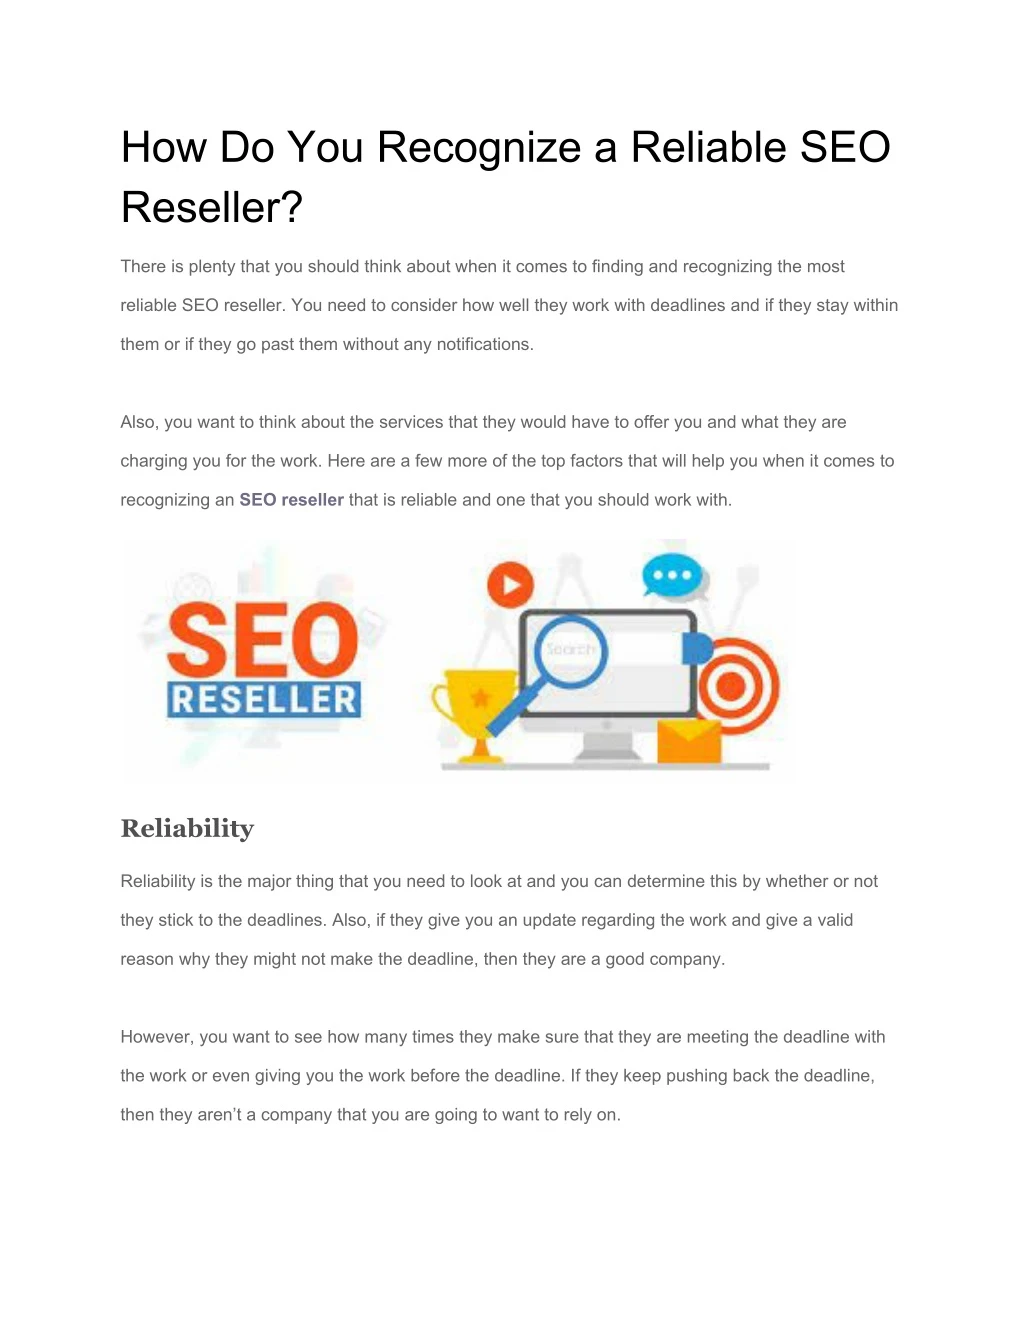 how do you recognize a reliable seo reseller